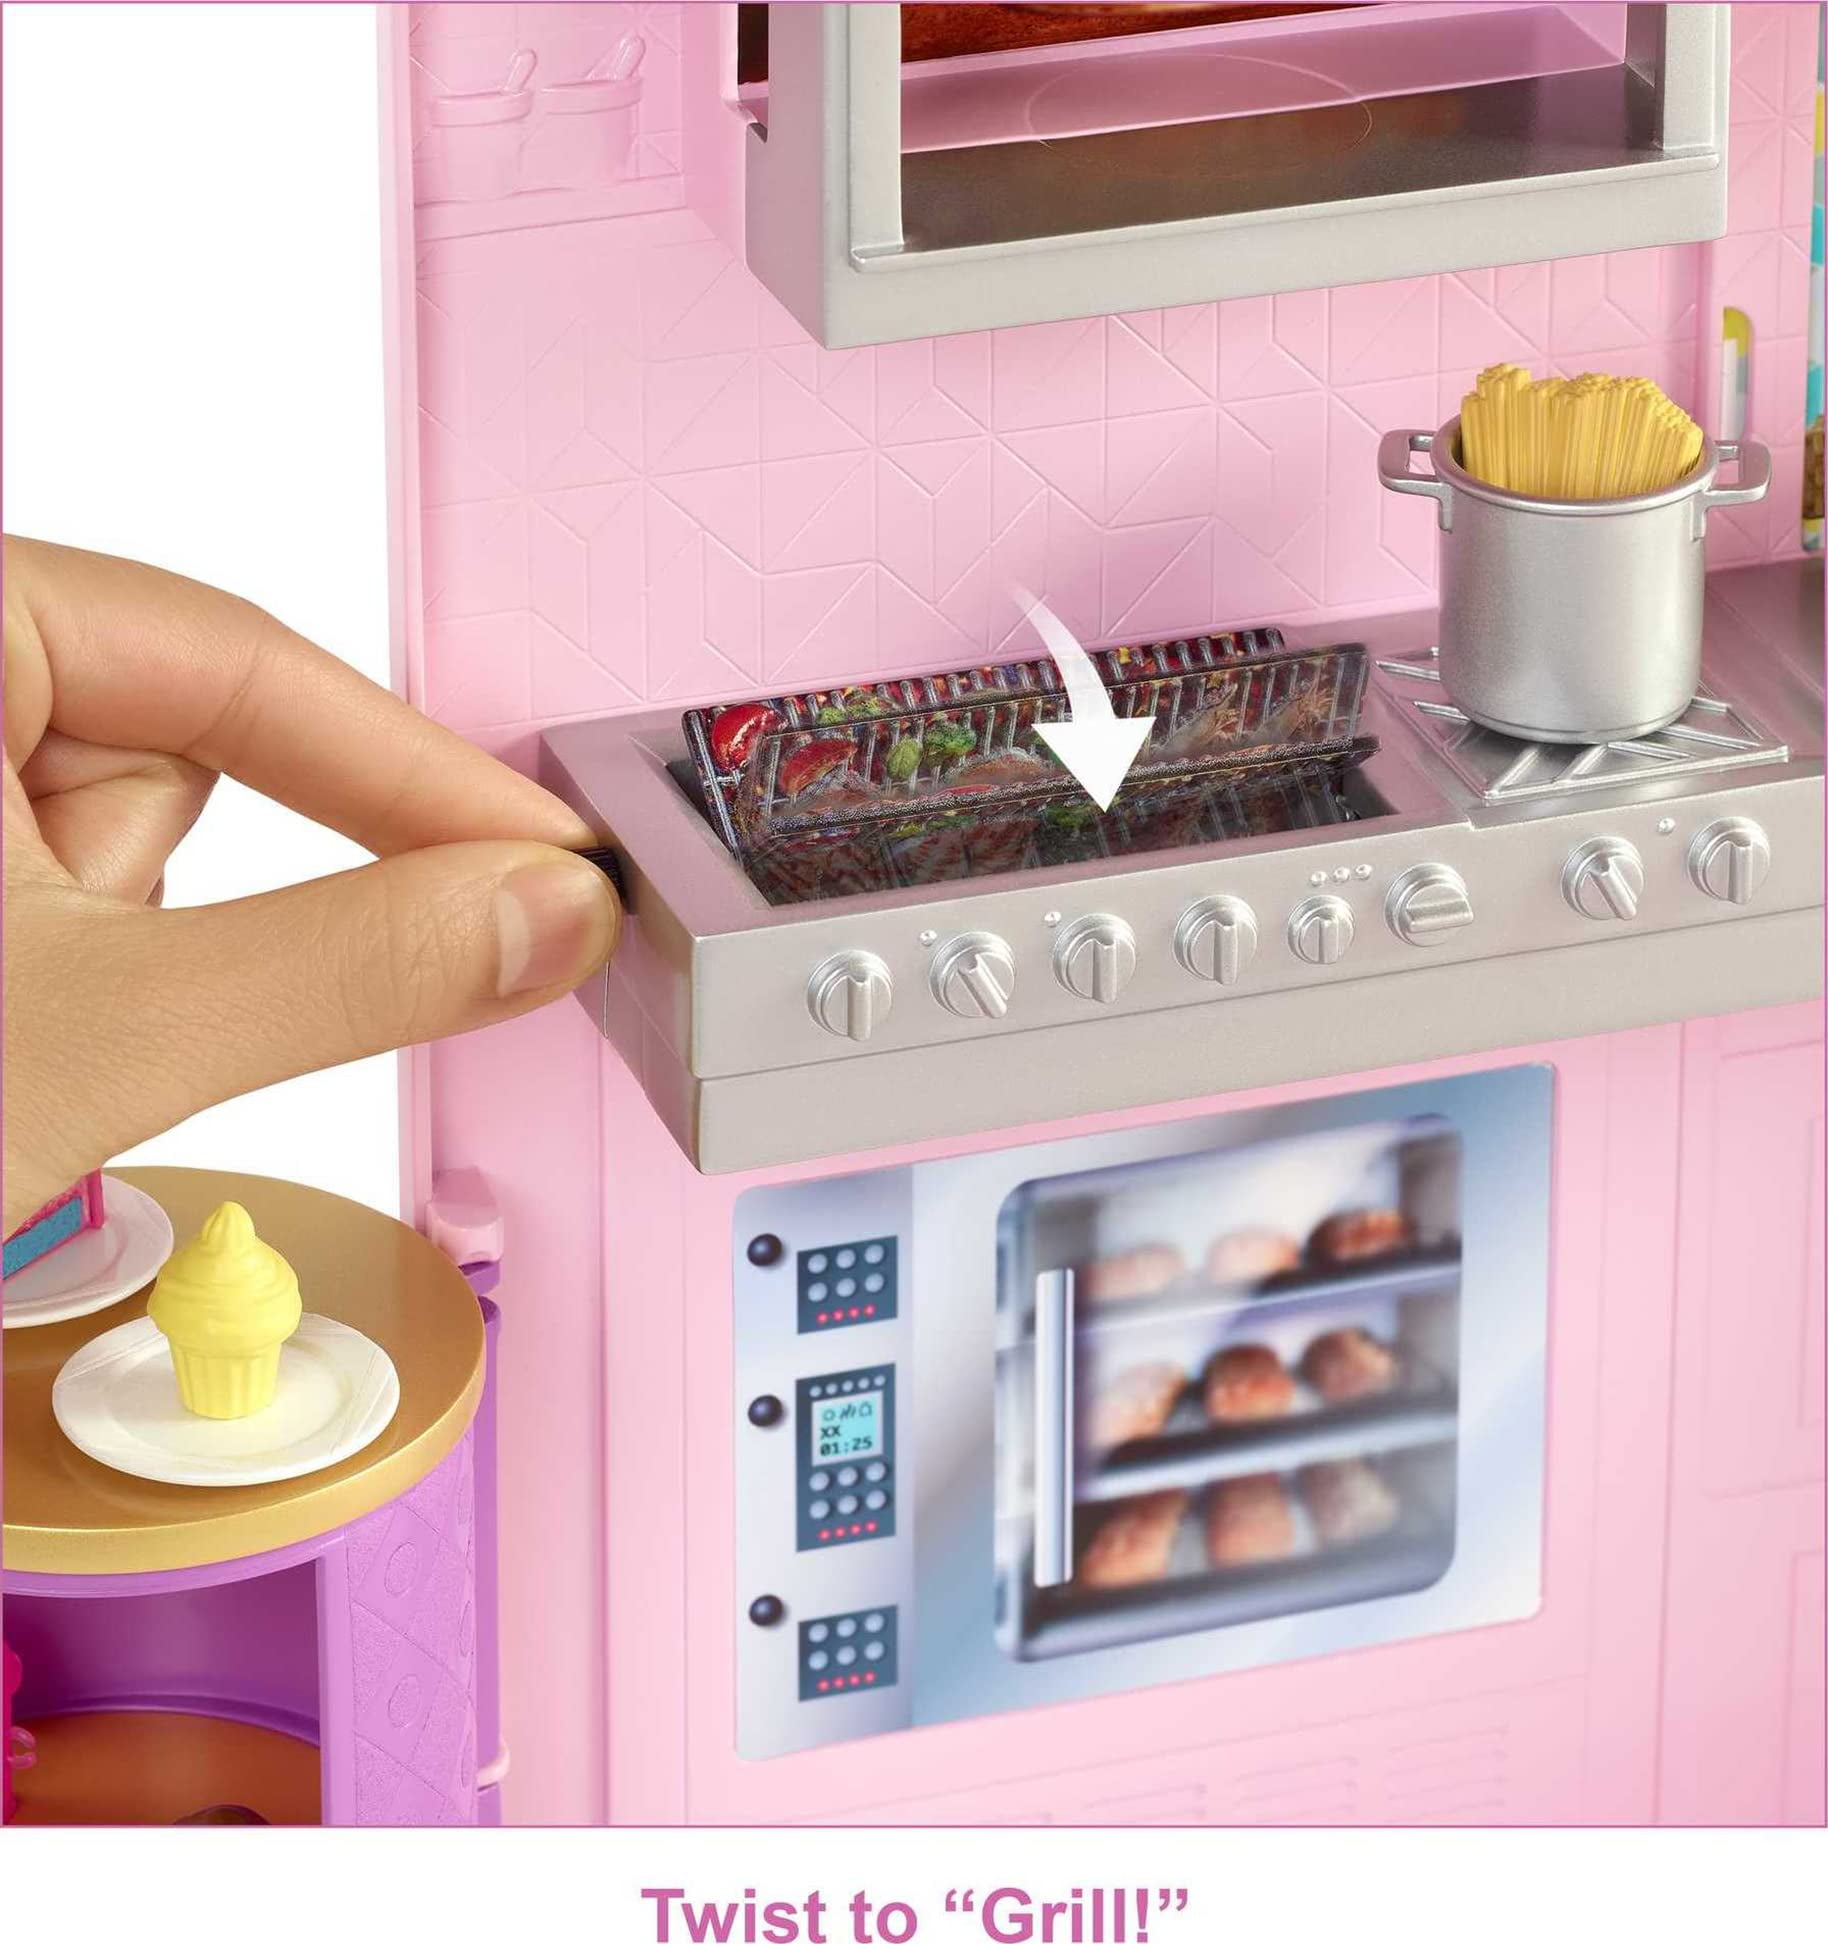  Barbie Cook 'n Grill Restaurant Playset with Barbie Doll, 30+  Pieces & 6 Play Areas Including Kitchen, Pizza Oven, Grill & Dining Booth,  For 3 to 7 Year Olds : Toys & Games